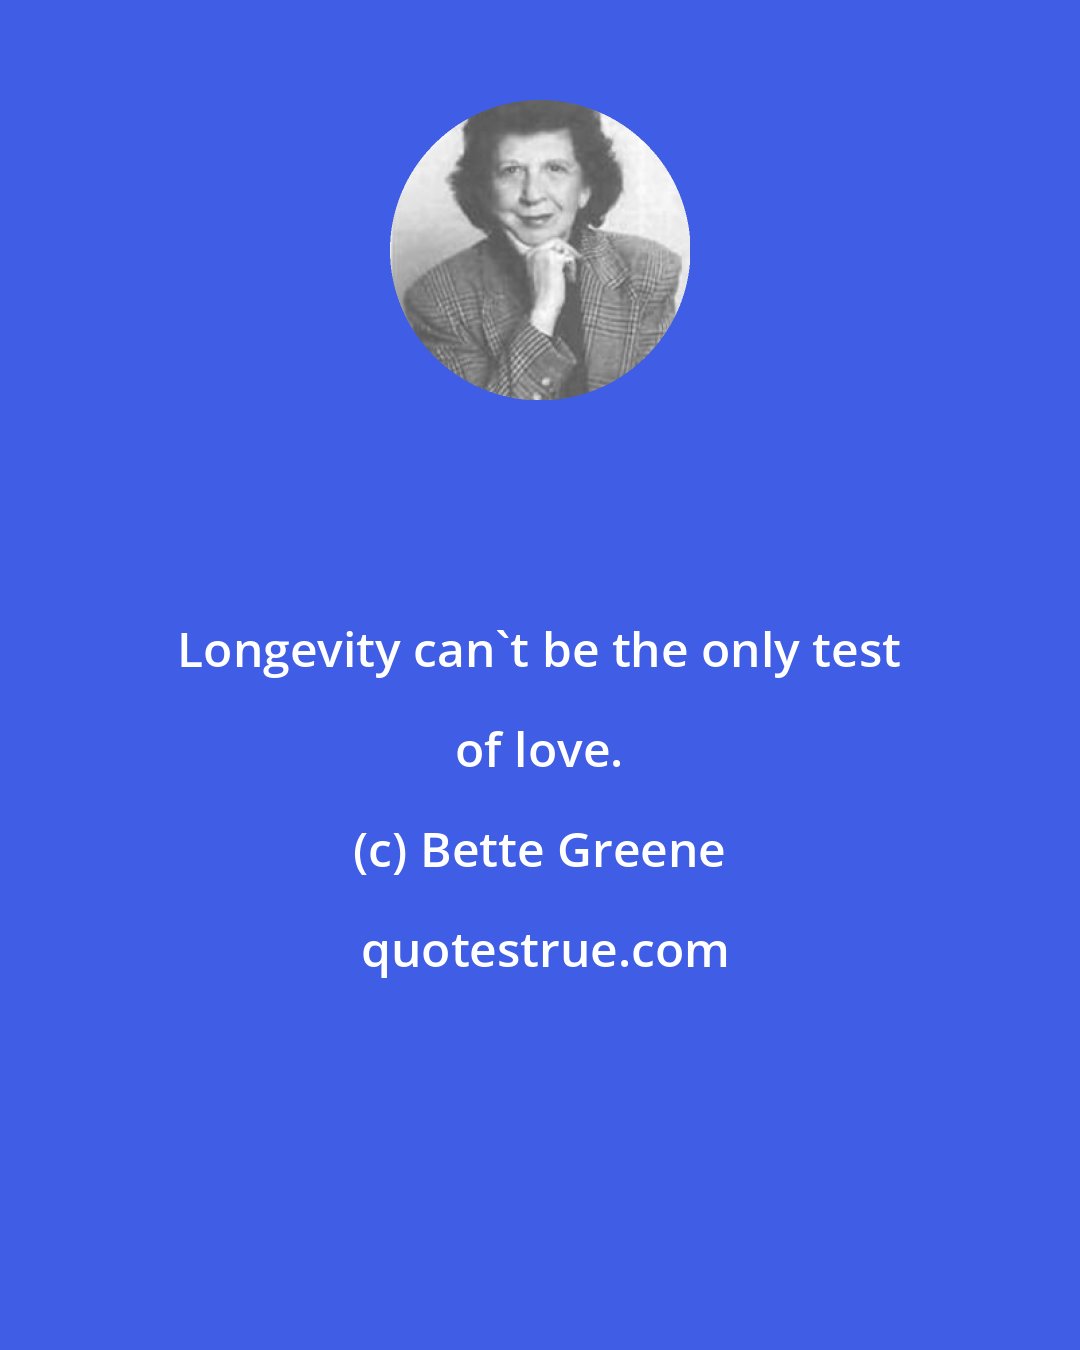 Bette Greene: Longevity can't be the only test of love.